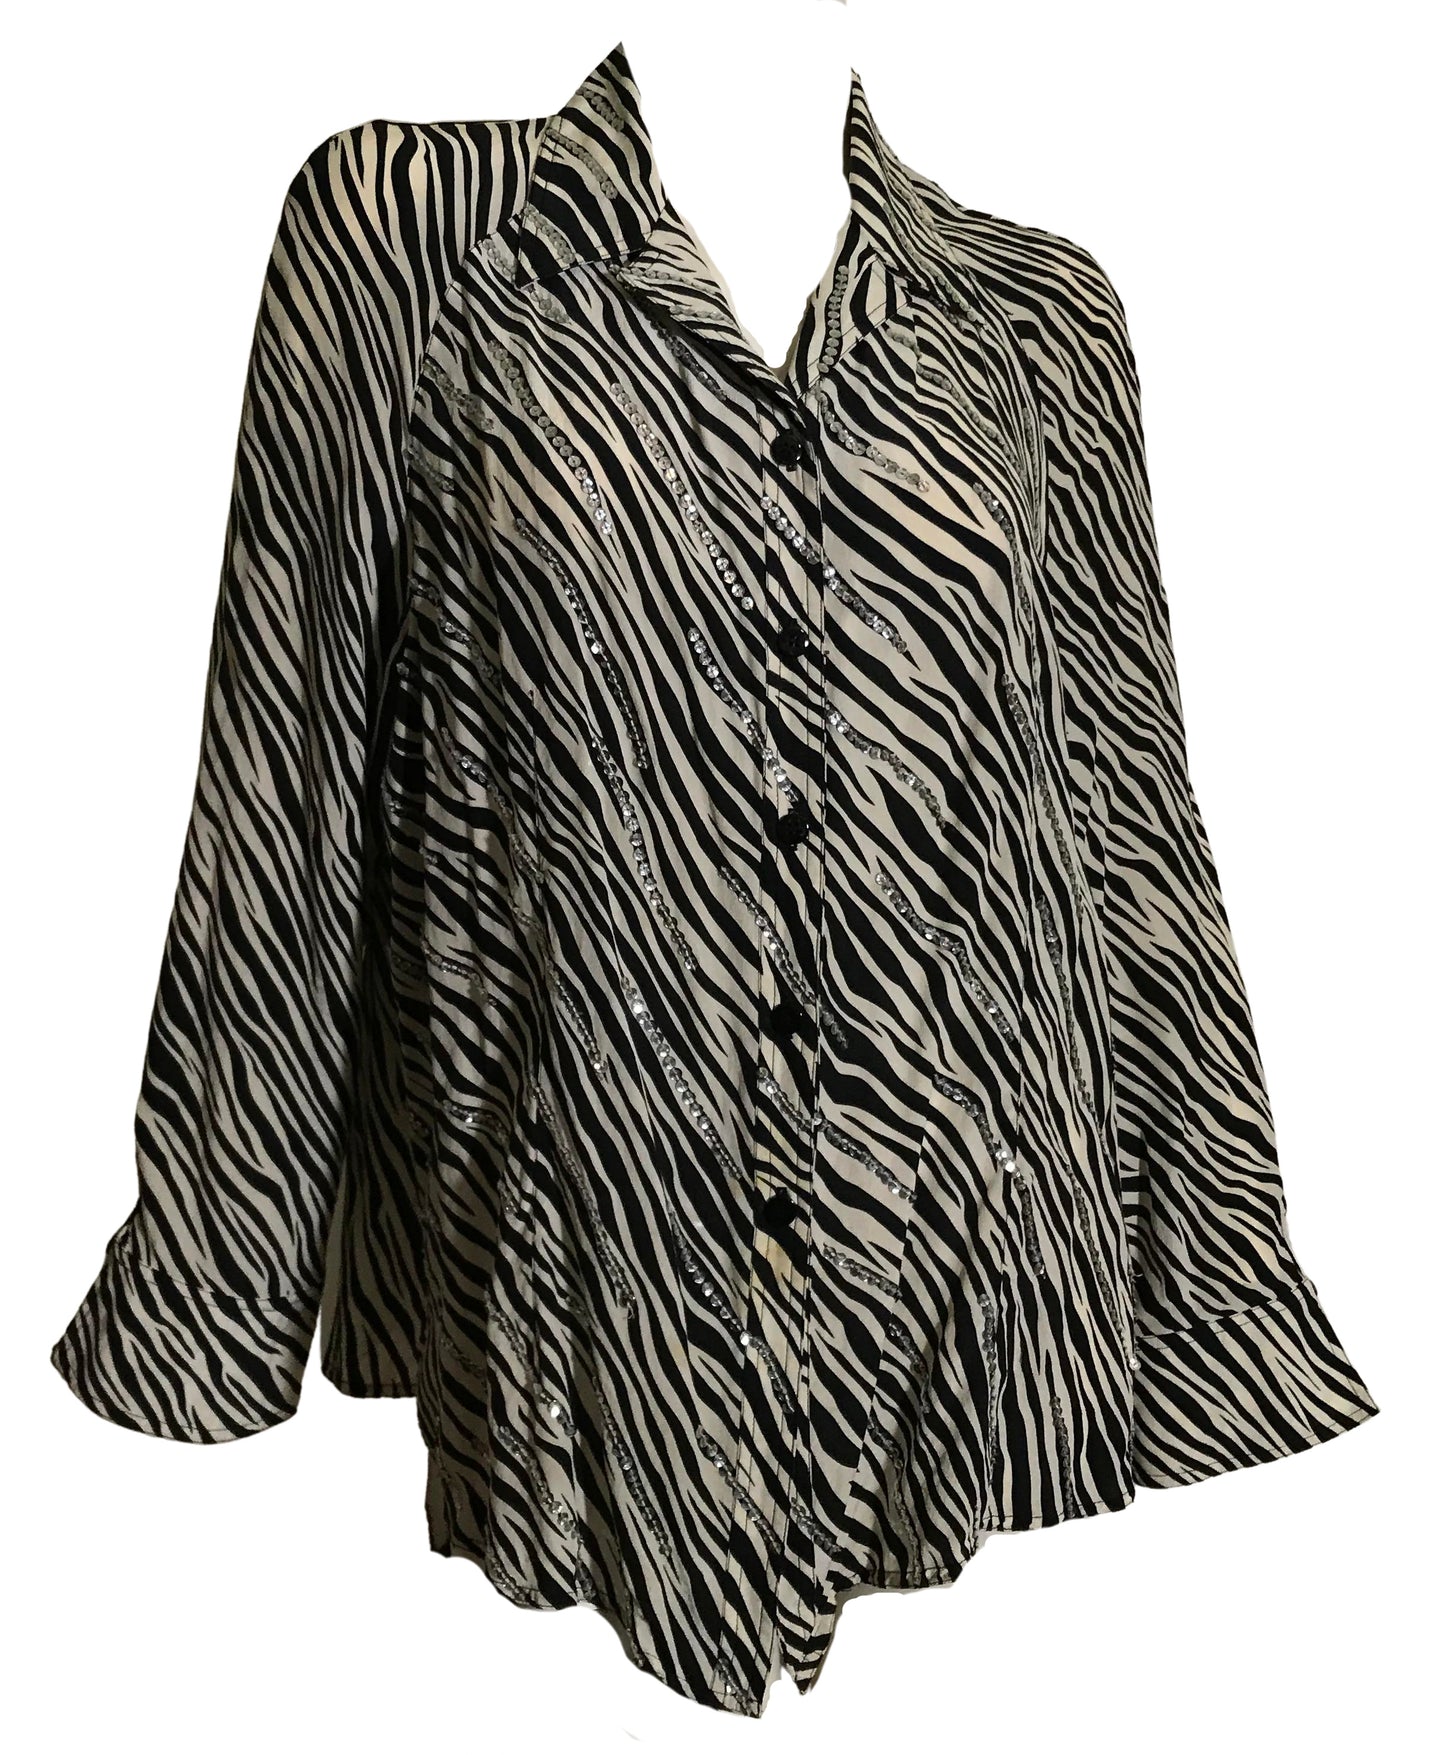 Chic Zebra Striped Silk Swing Cut Blouse with Sequins circa 1990s